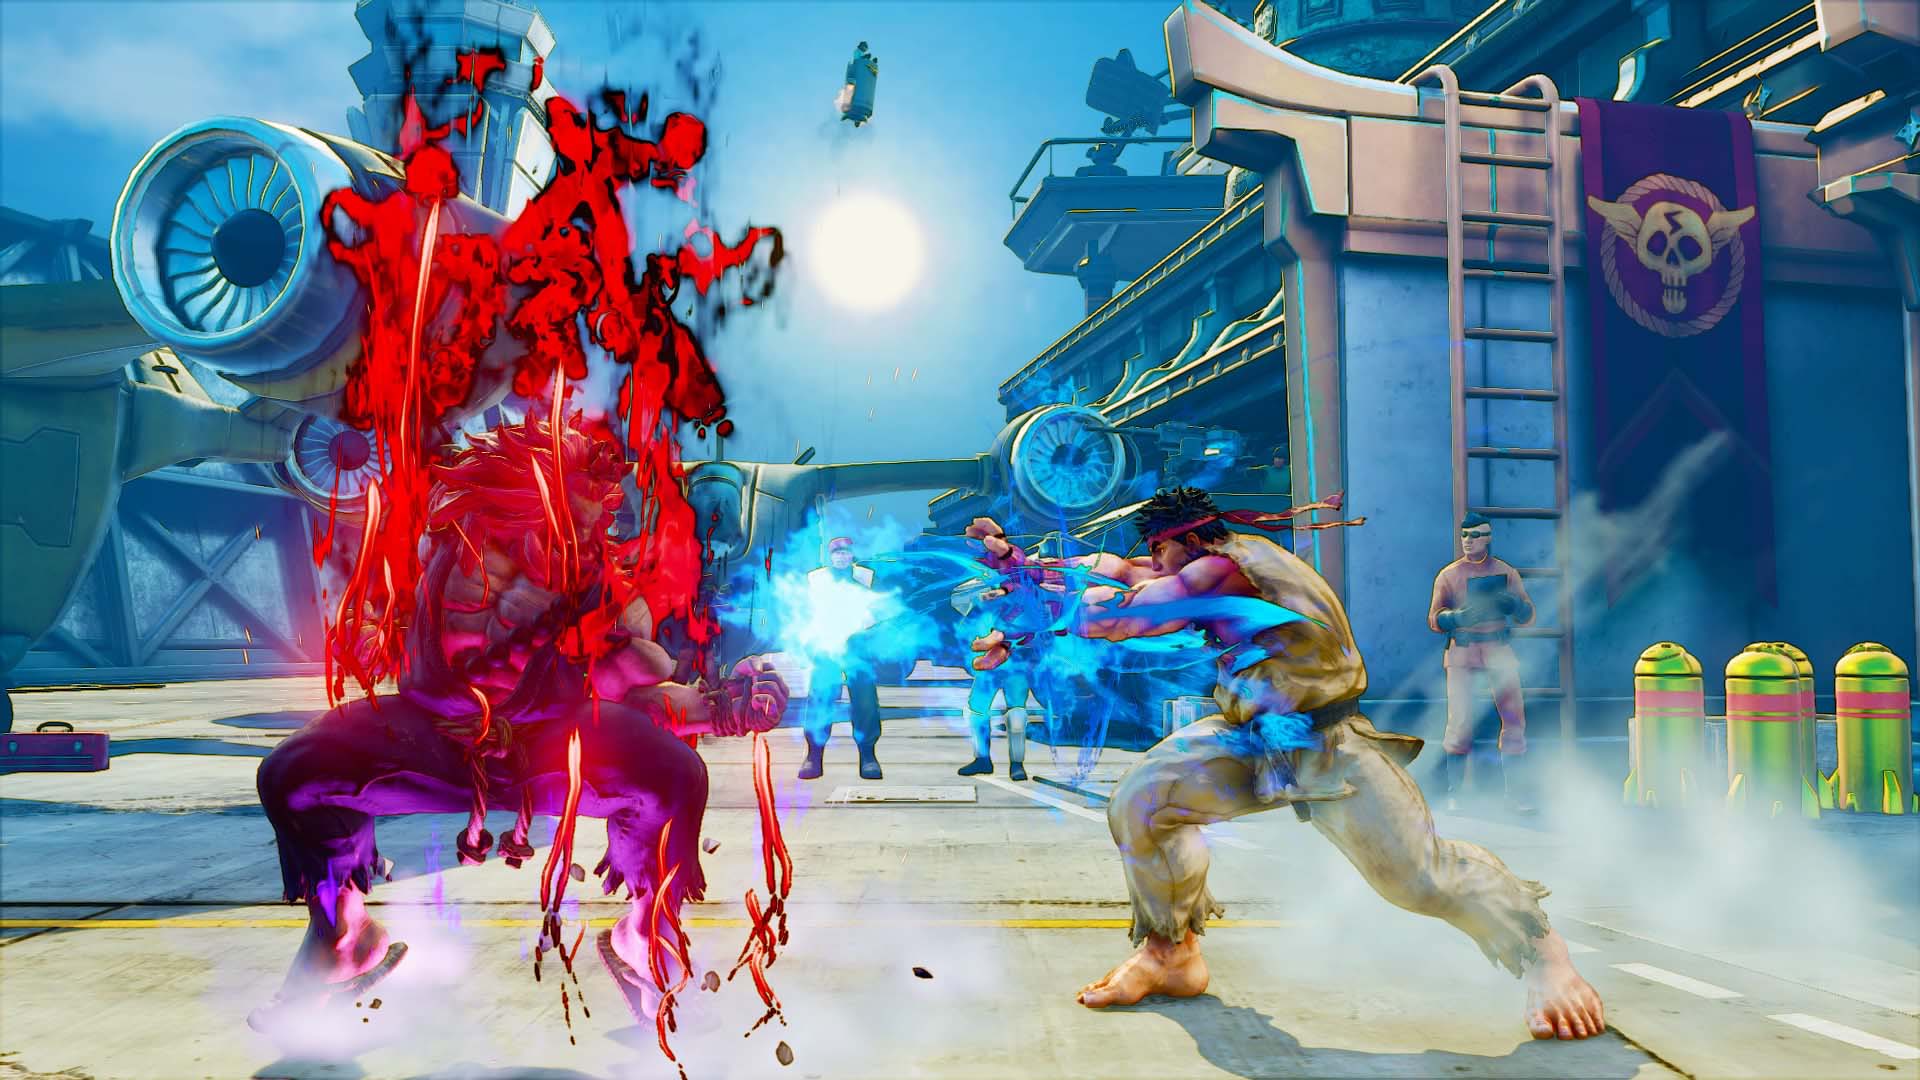 Street Fighter V Champion Edition (PS4) : Video Games 